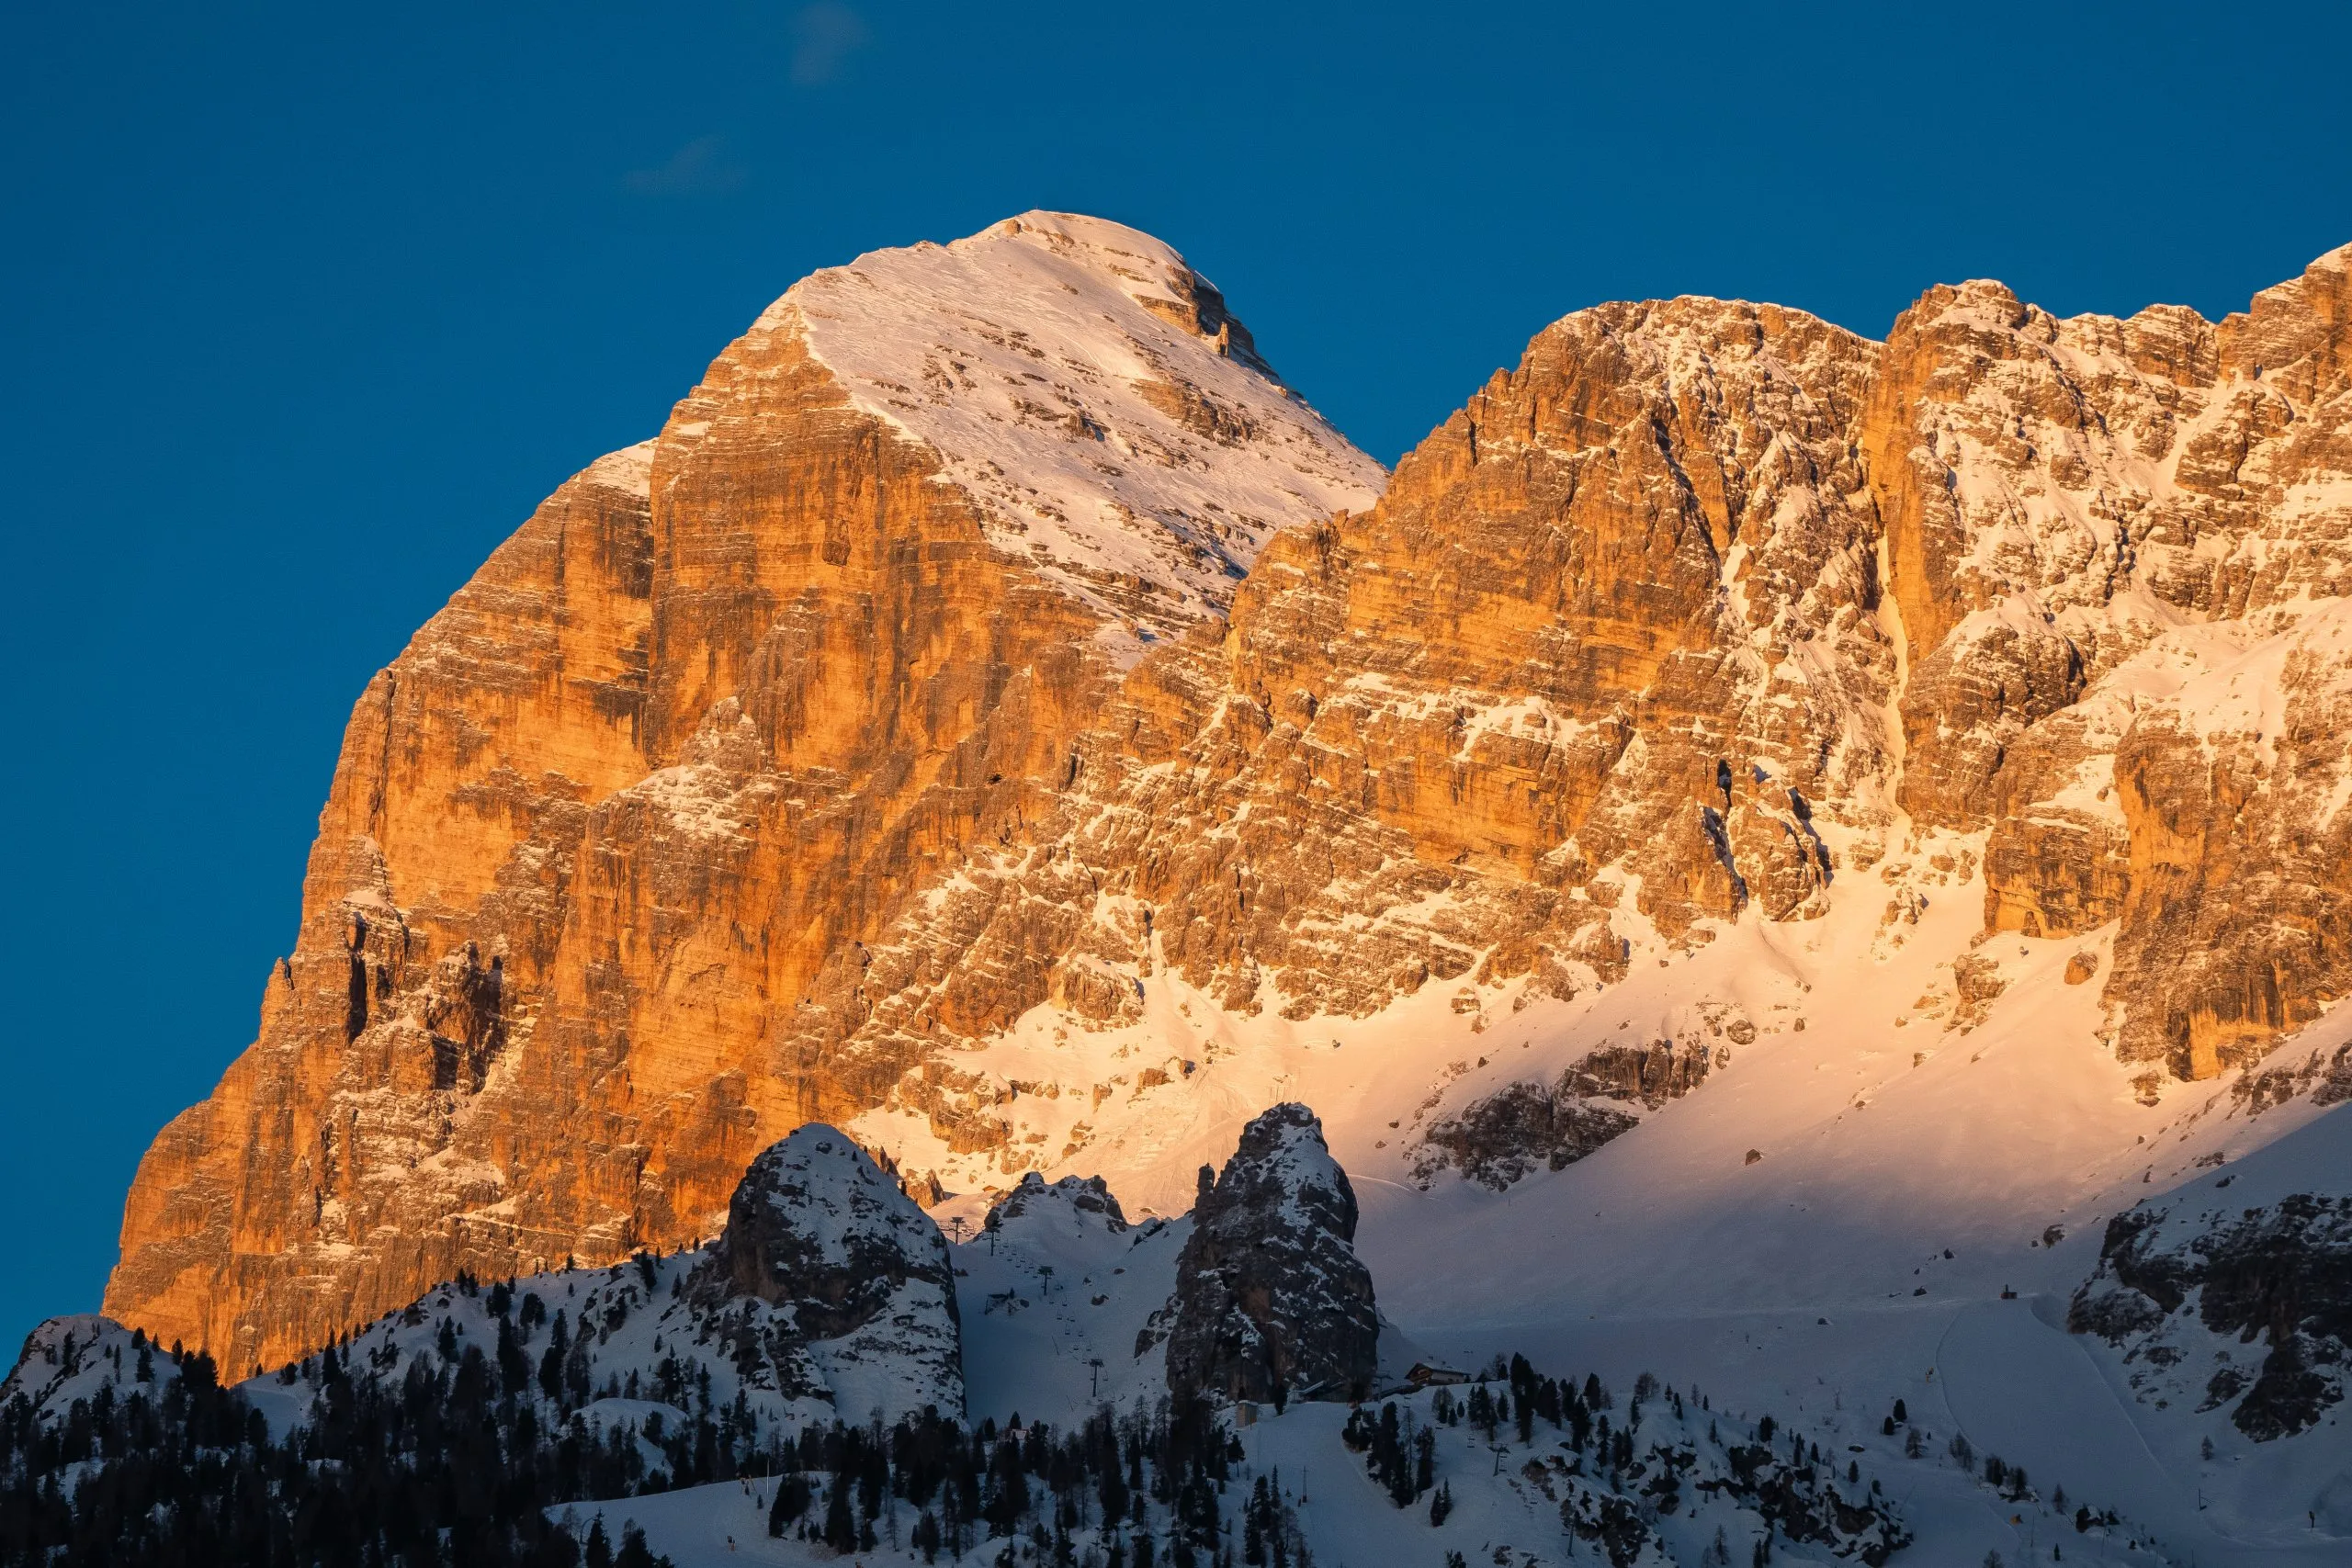 Tofana di Rozes or Tofana I Peak in Cortina d'Ampezzo in Winter at Dawn, Snow Covered at Sunrise with Early Morning Light